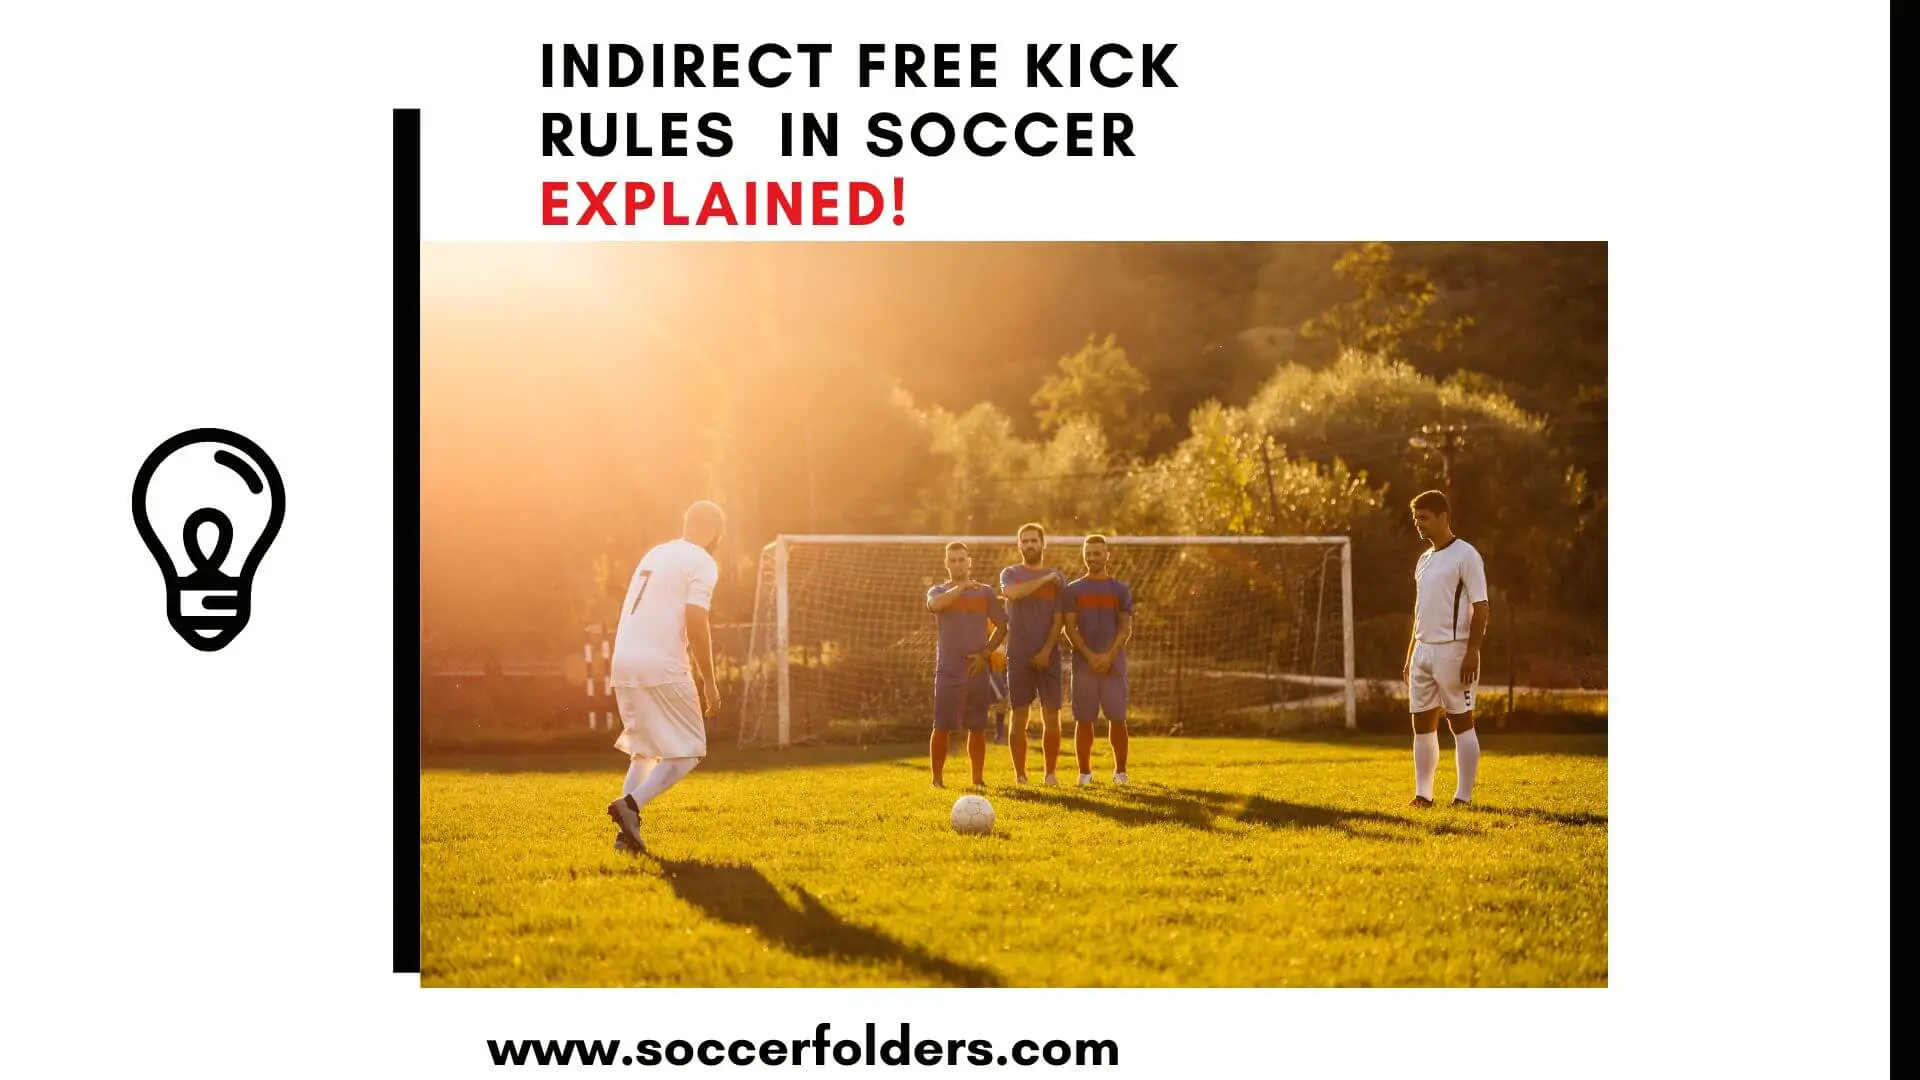 Indirect free kick rules in soccer - Featured image